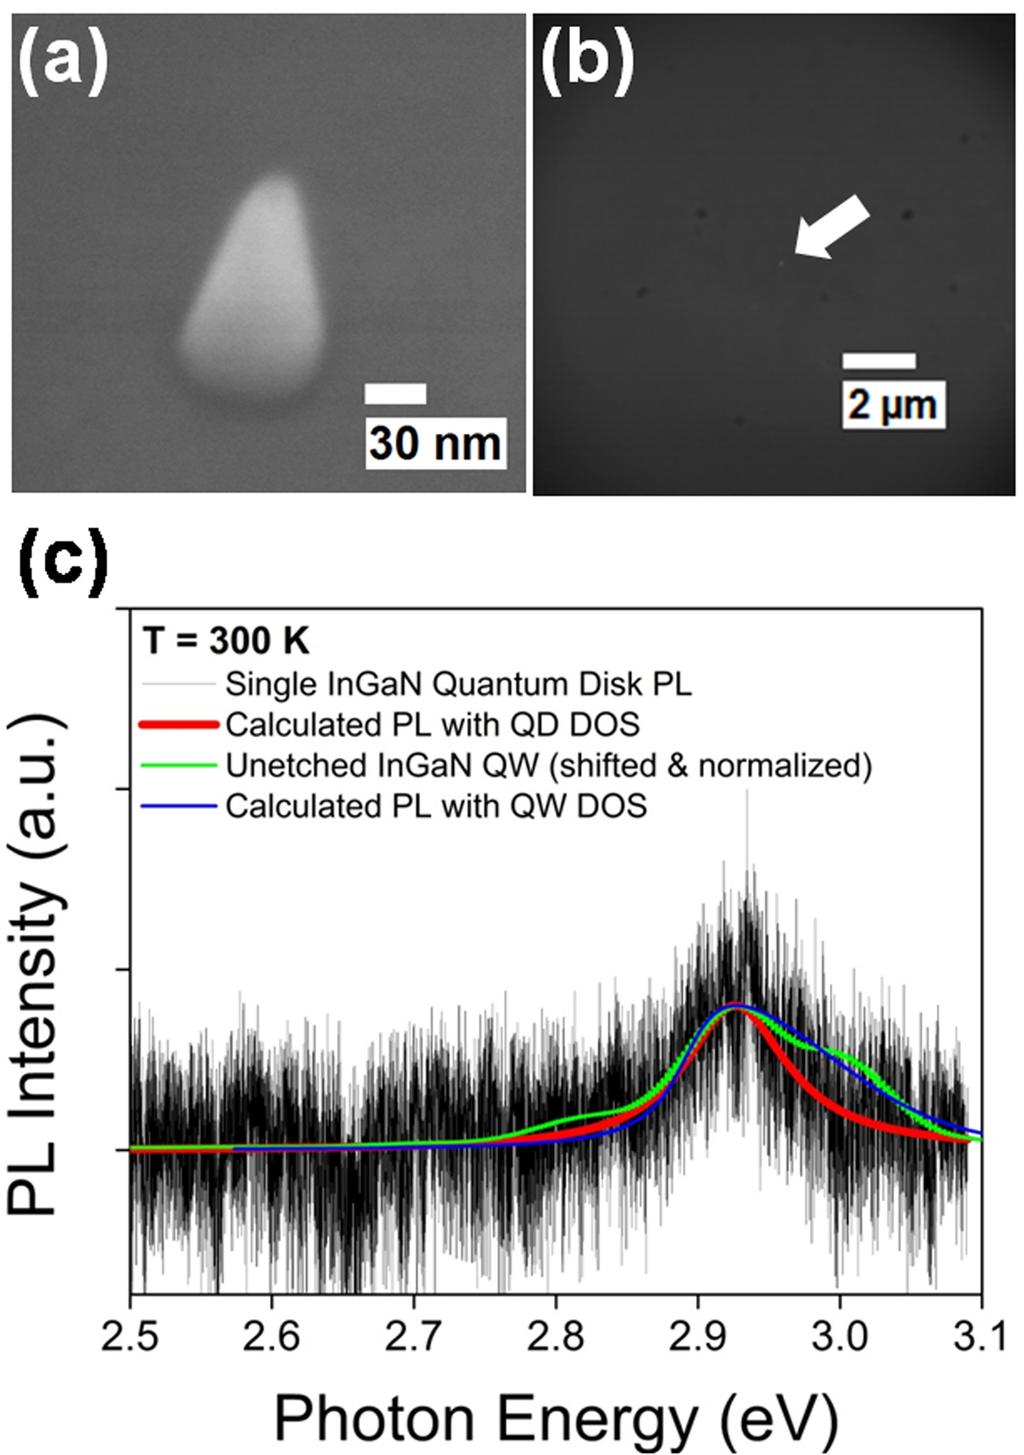 closely at quantum disk s emission properties that may resemble to that of a QD, we performed a size-dependent PL measurement described in the following section. Fig.